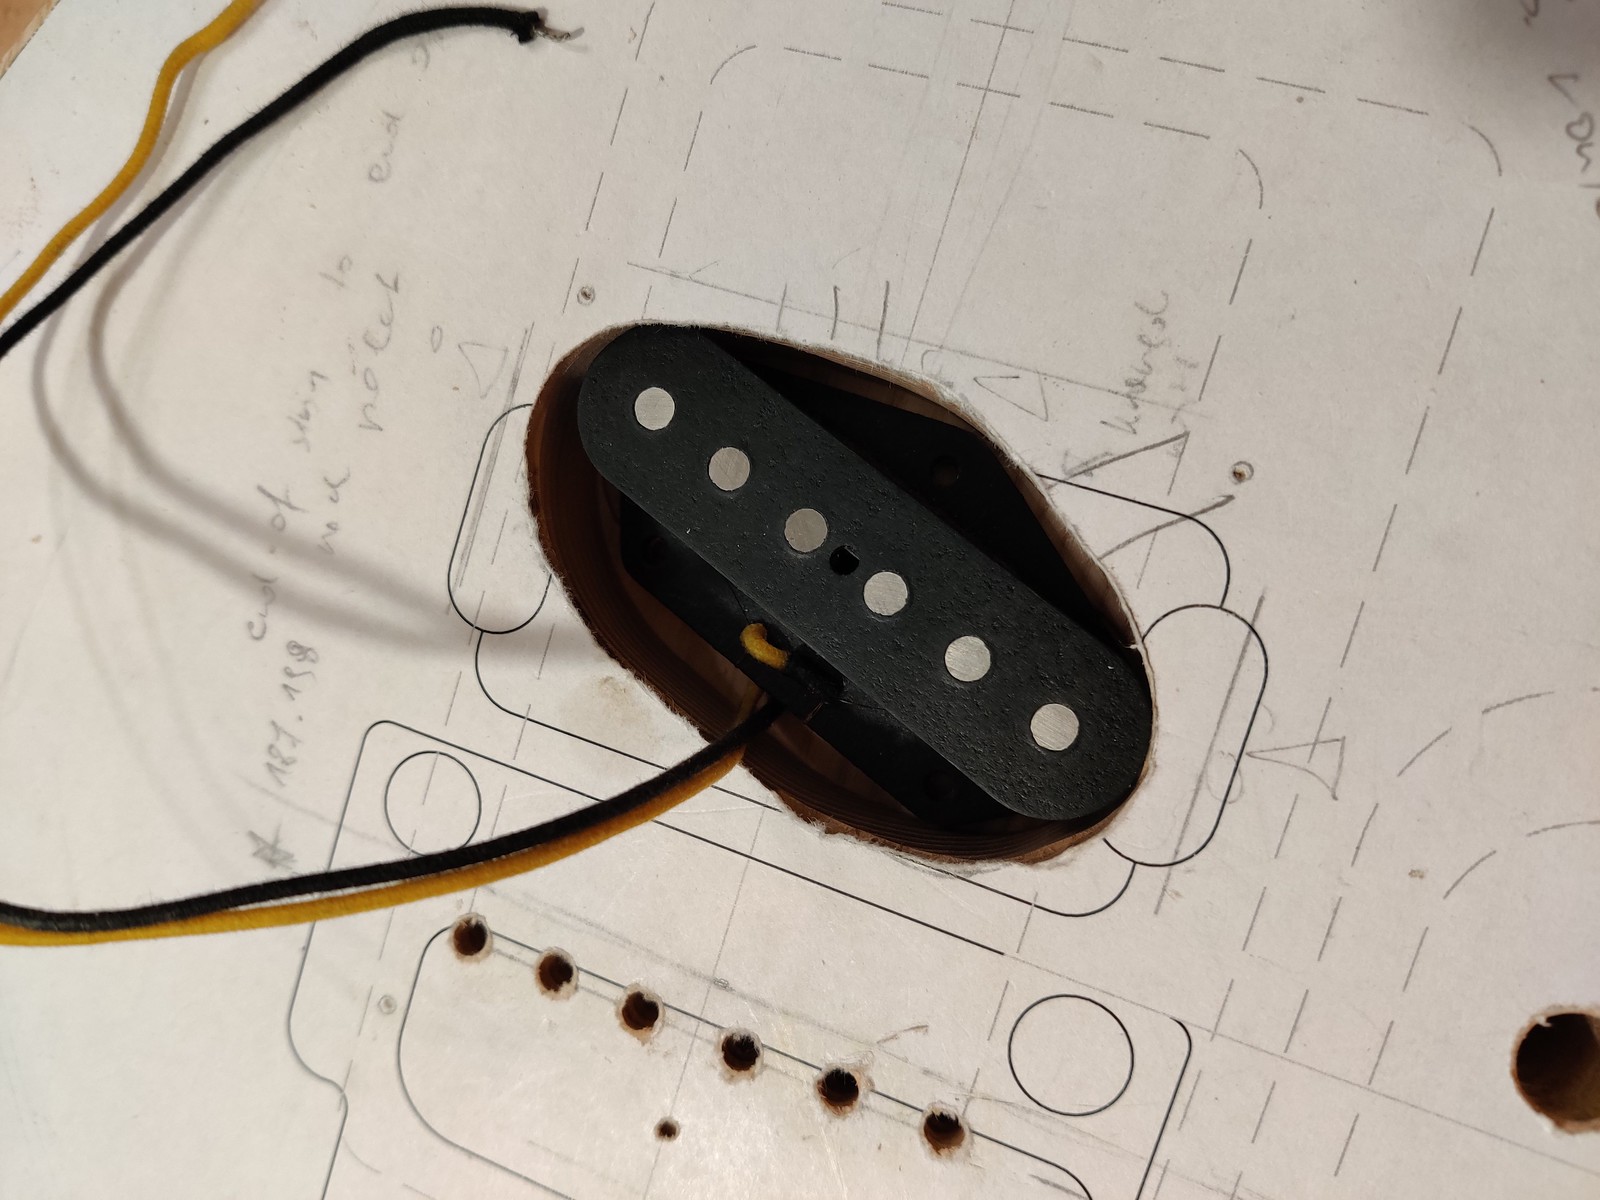 Telecaster bridge pickup fitting in a cavity